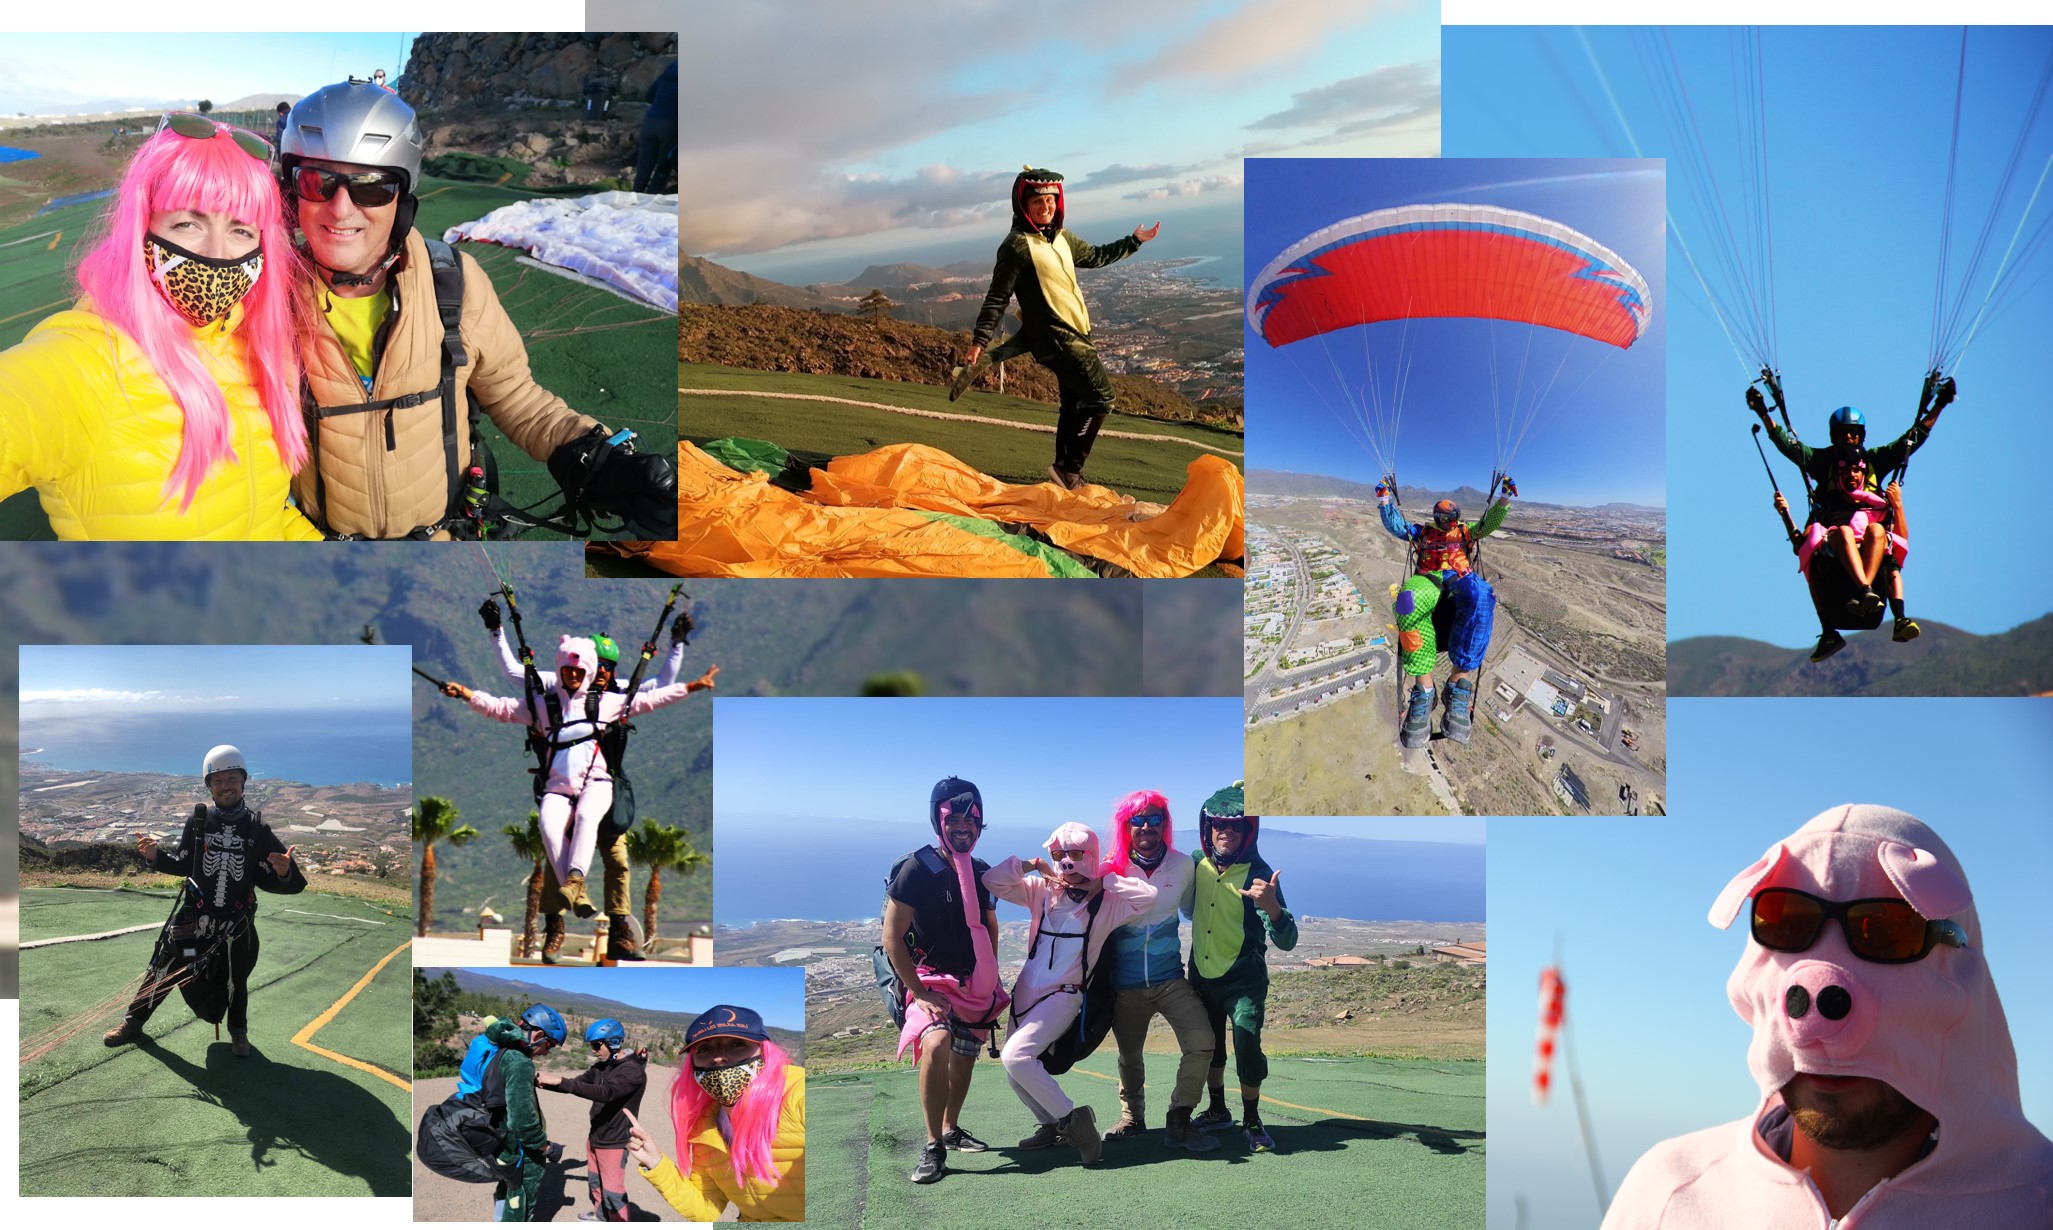 Look at how paragliding pilots and passengers supported the idea of the Carnival 2021 in Tenerife.